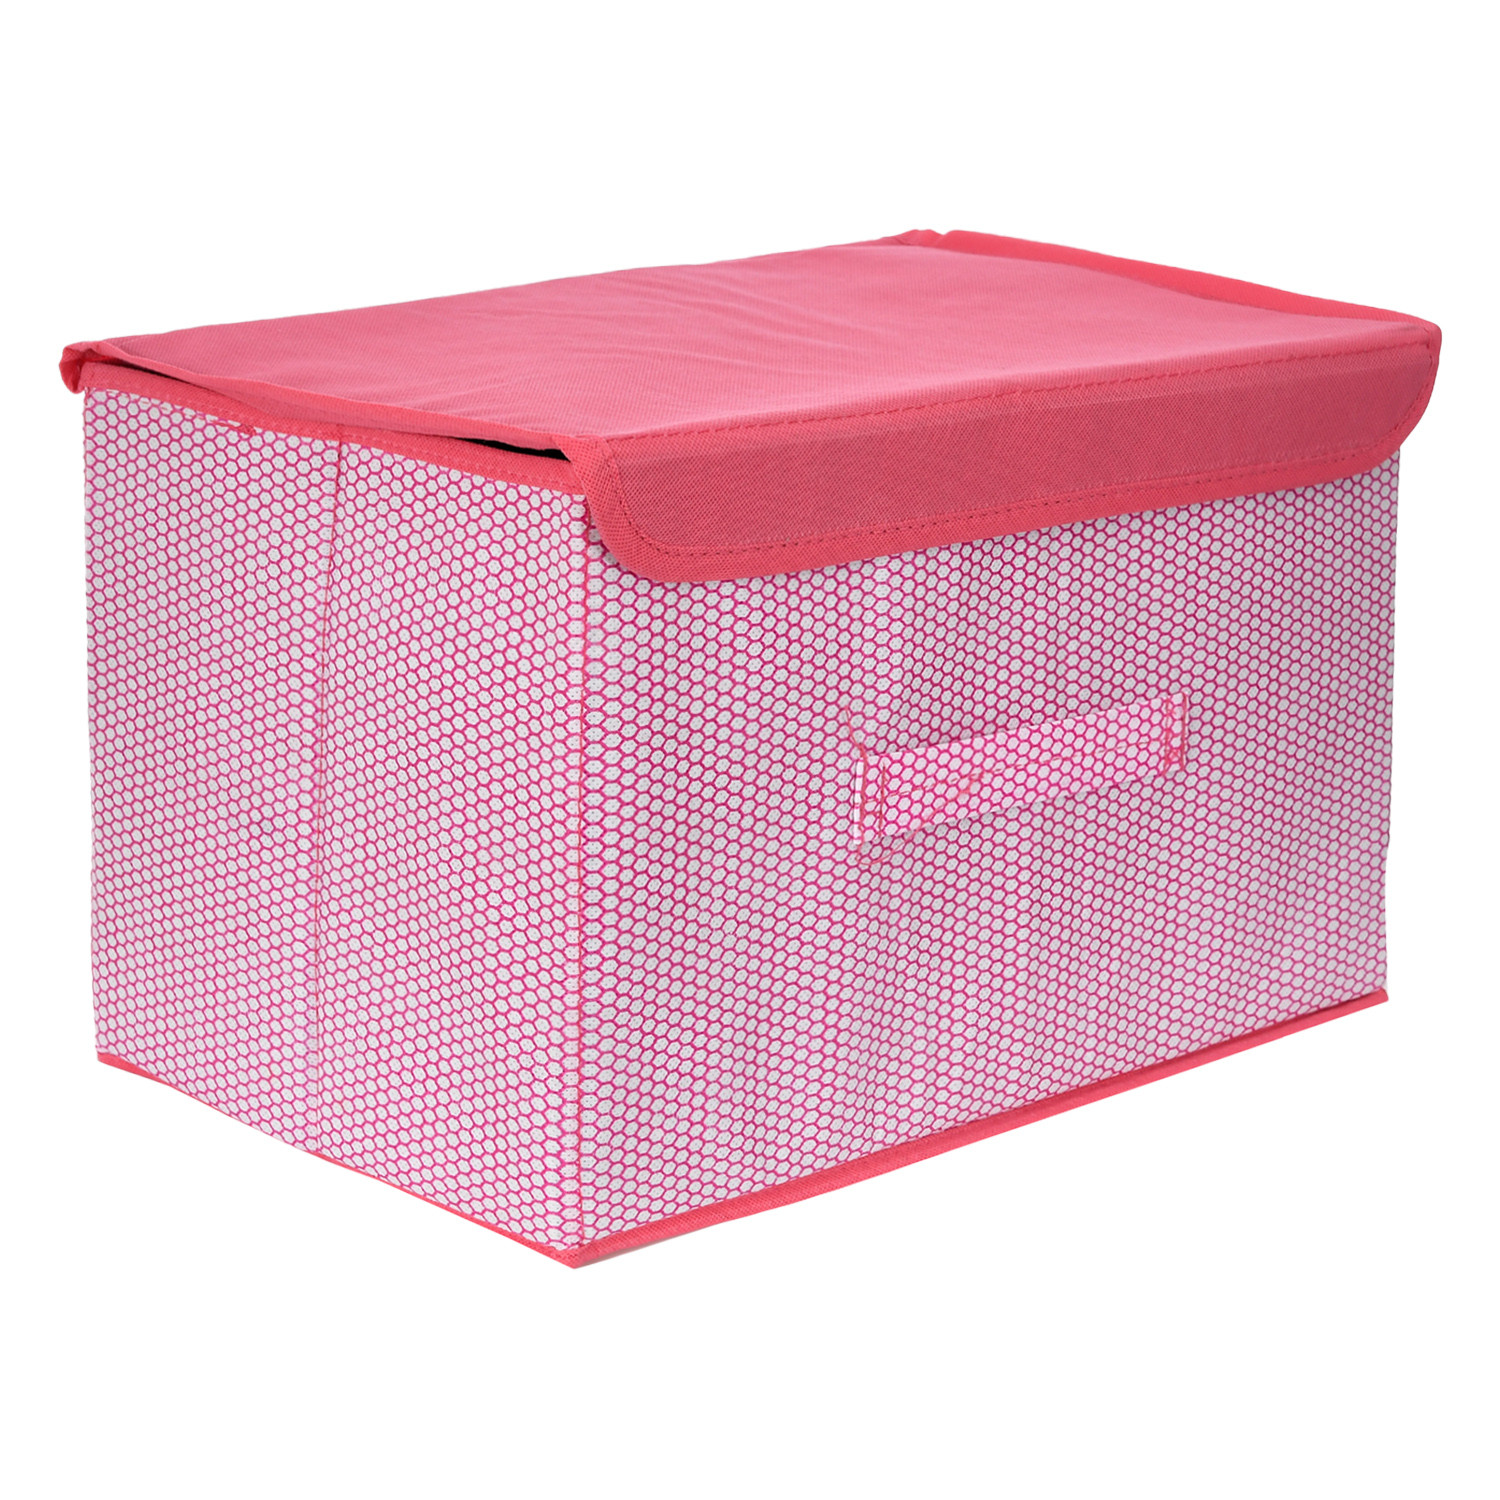 Kuber Industries Drawer Storage Box | Foldable Dhakkan Storage Box | Non-Woven Clothes Organizer For Toys | Storage Box with Handle | Large | Pack of 3 | Pink & Gray